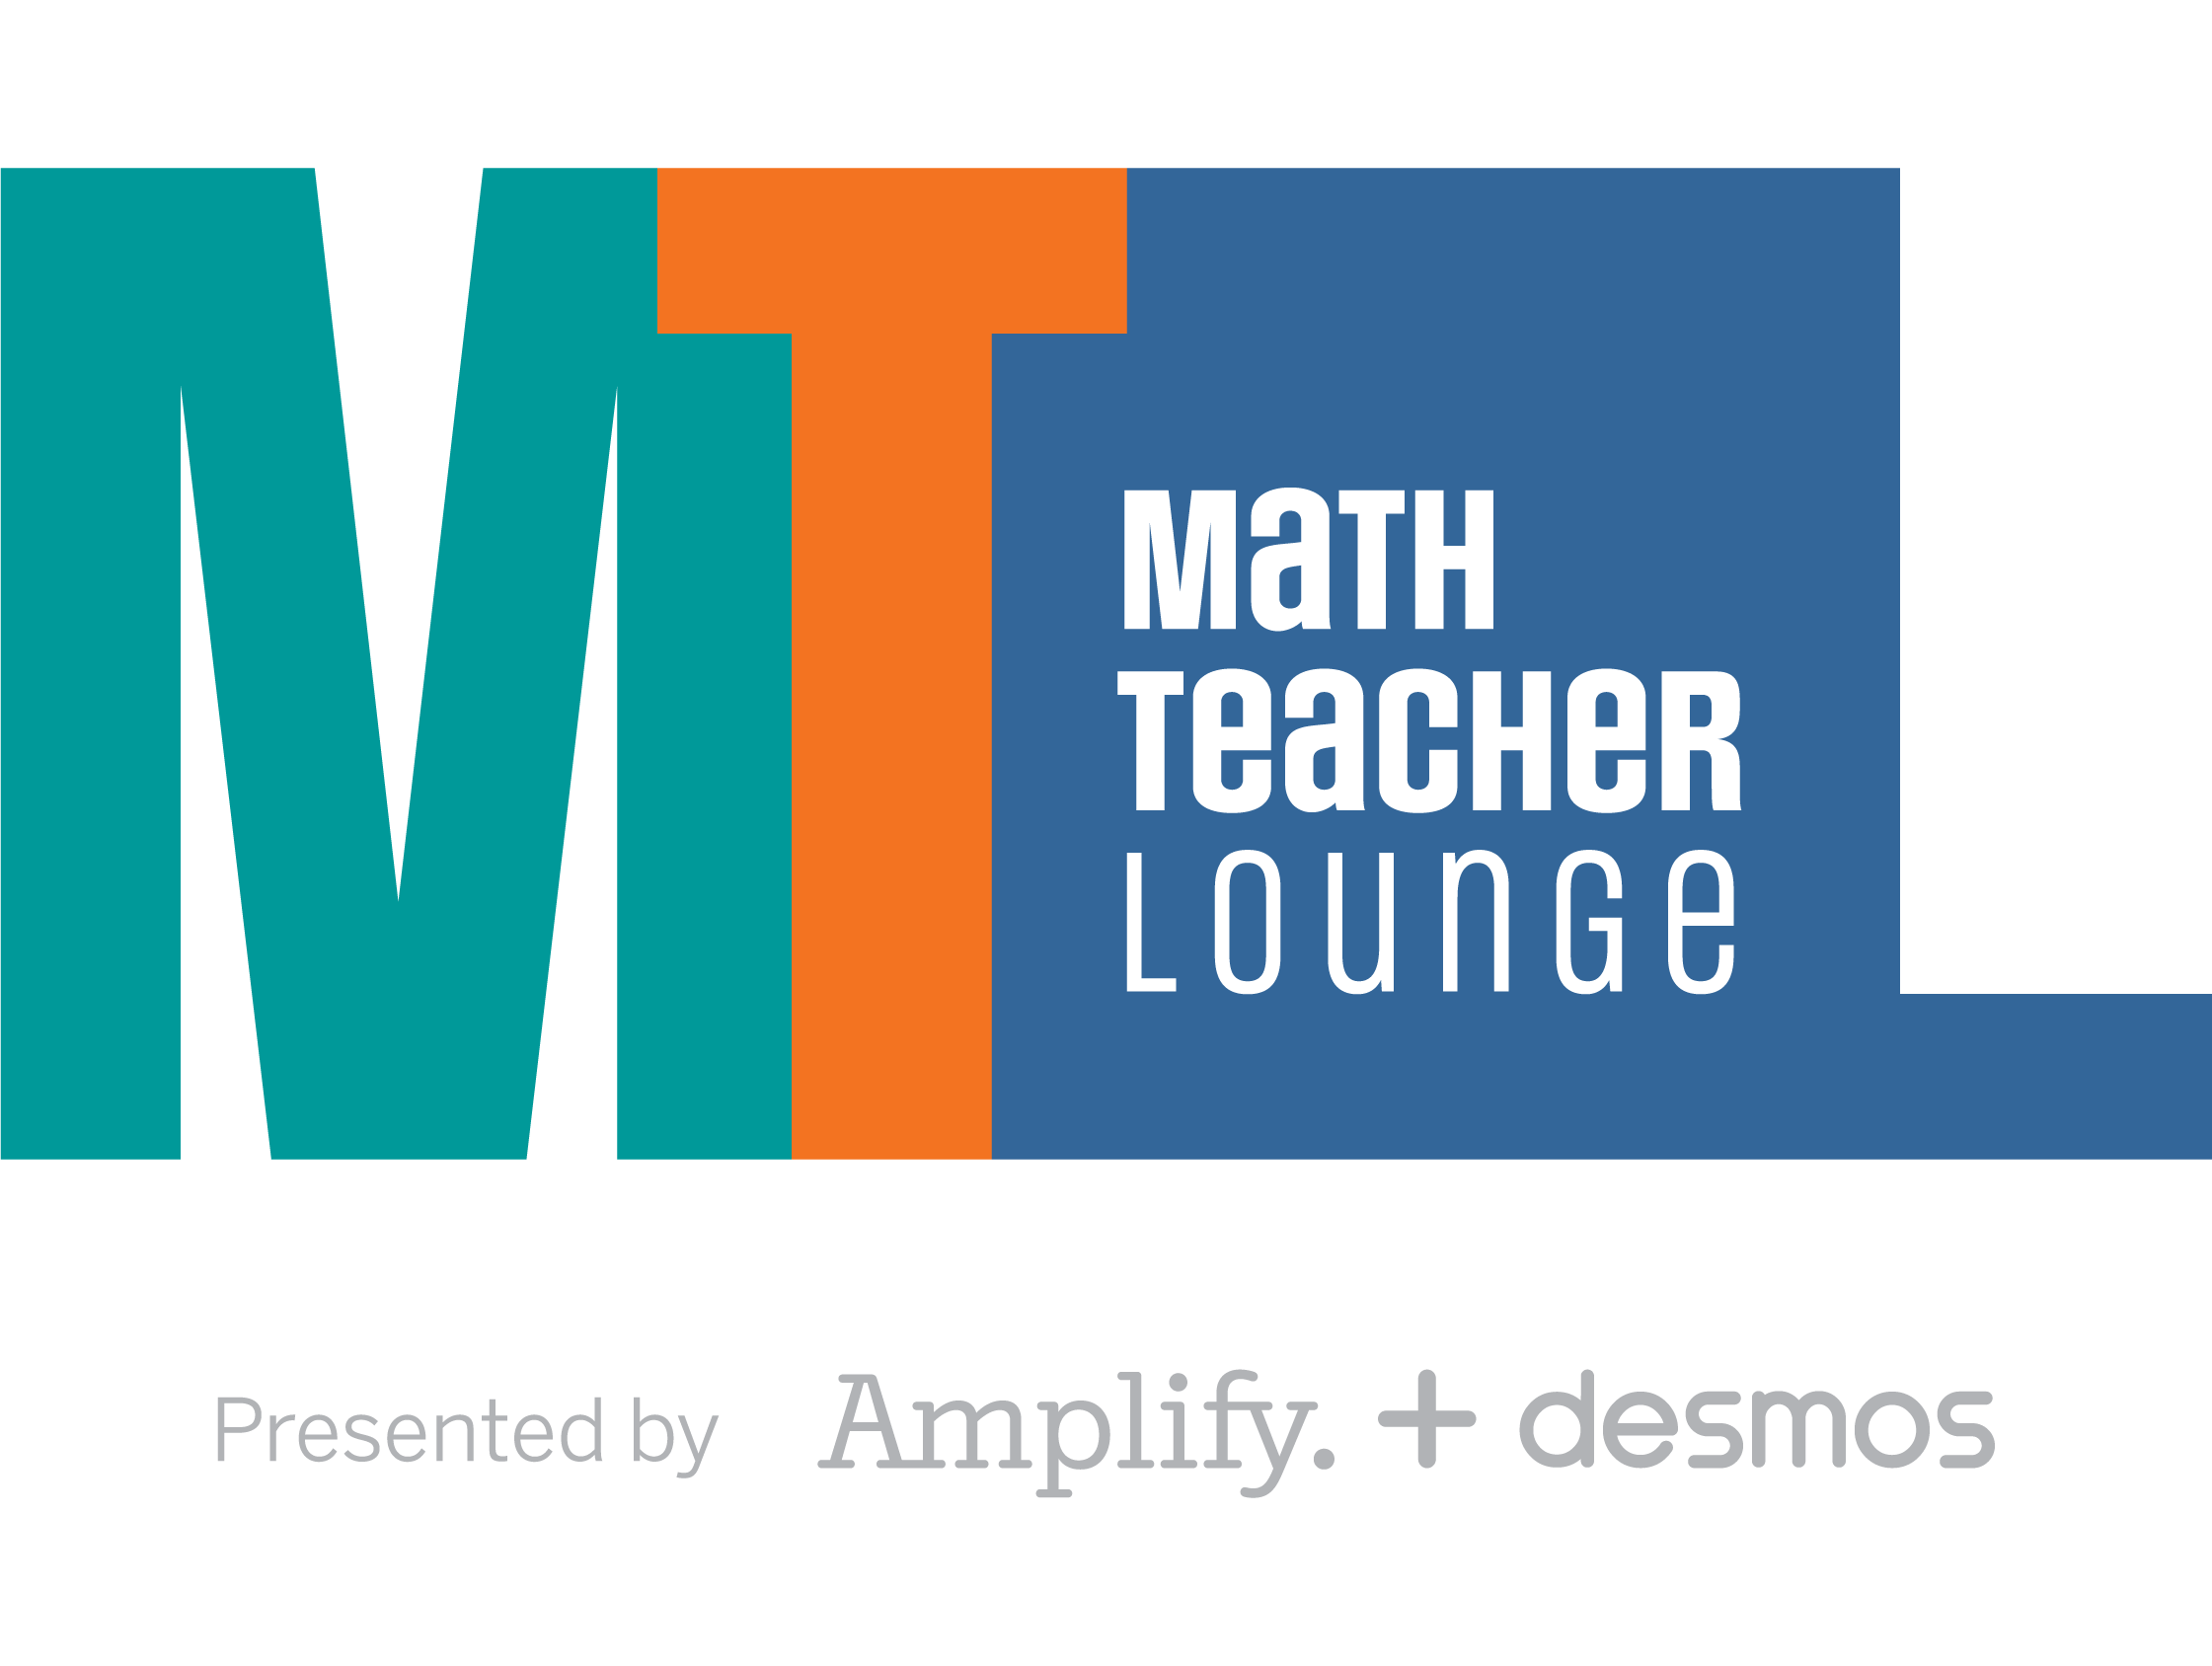 Logo of math teacher lounge, featuring large block letters with the words 'mtl' overlaid, presented by amplify and desmos, against a multicolored background.